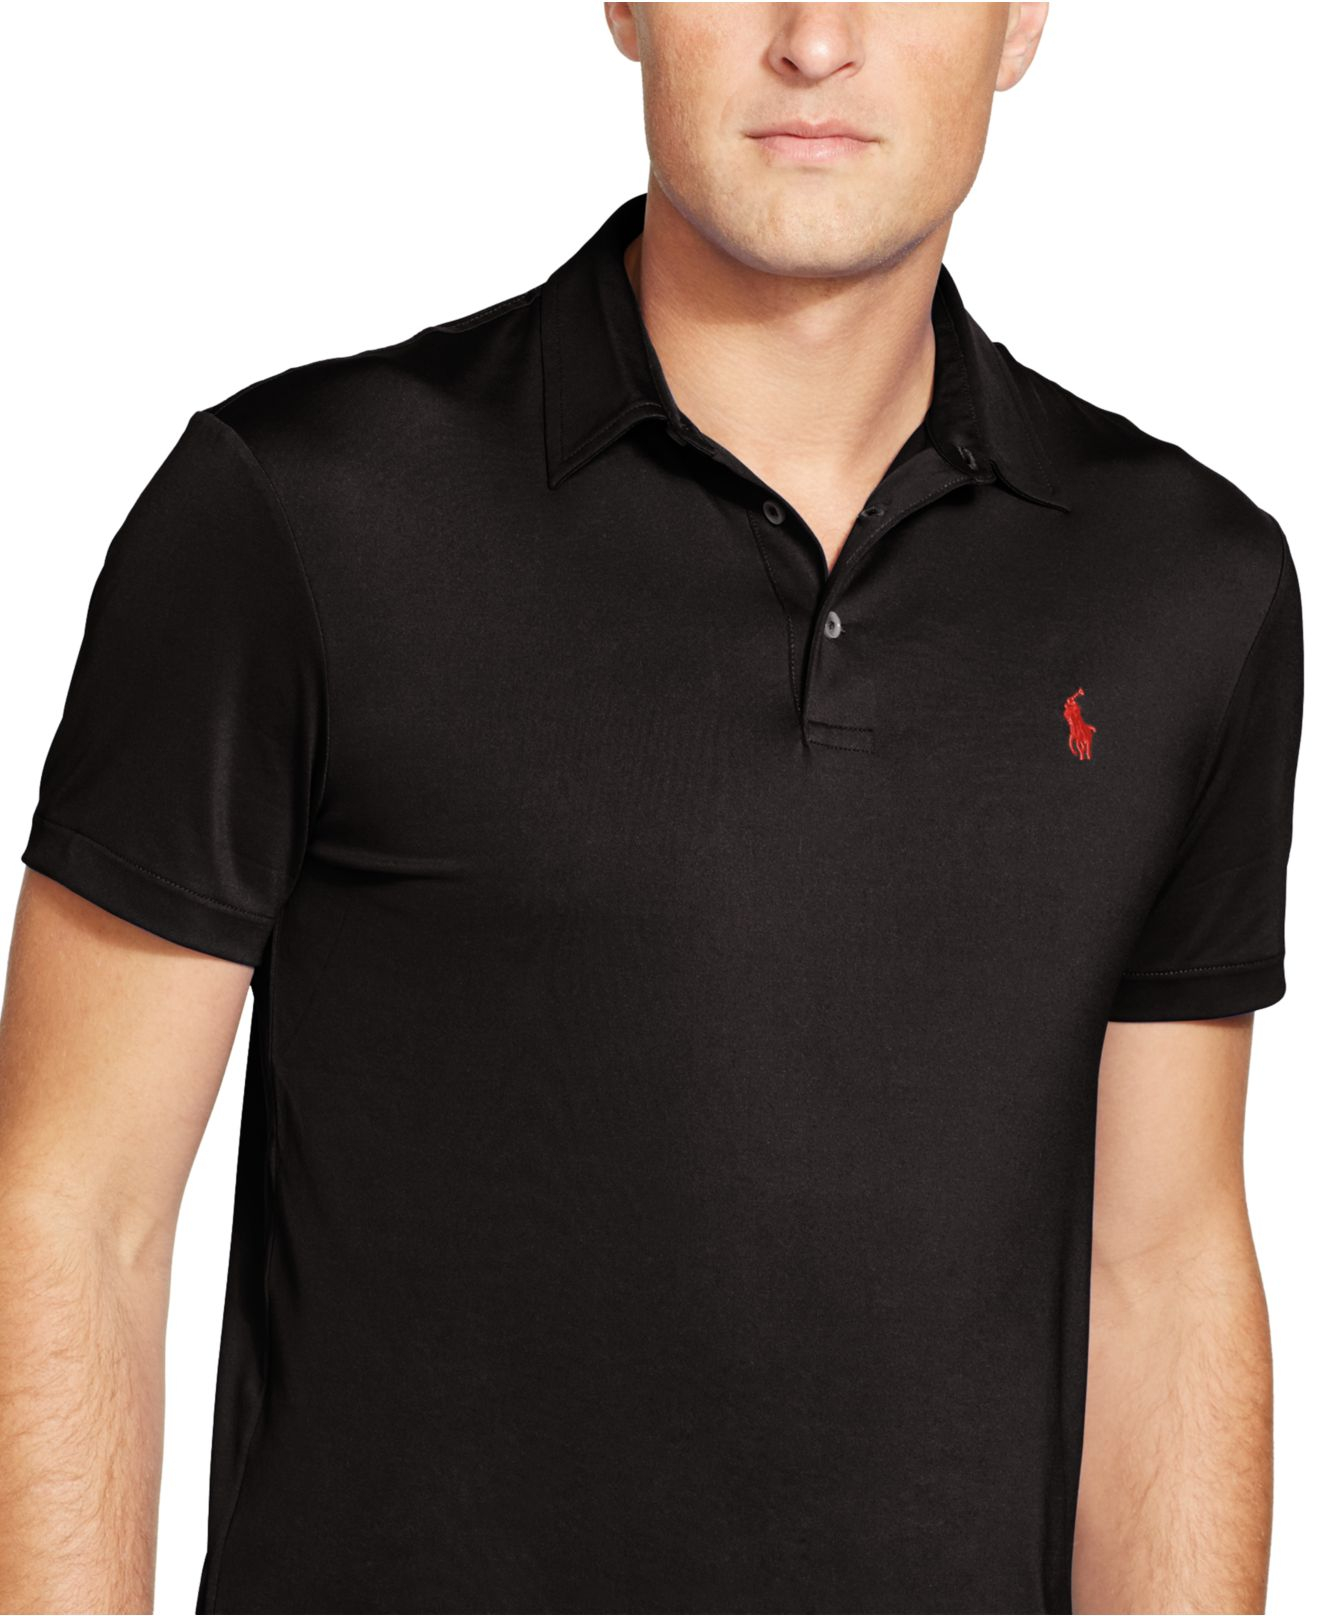 Polo Ralph Lauren Big & Tall Performance Polo Shirt in Black for Men - Lyst